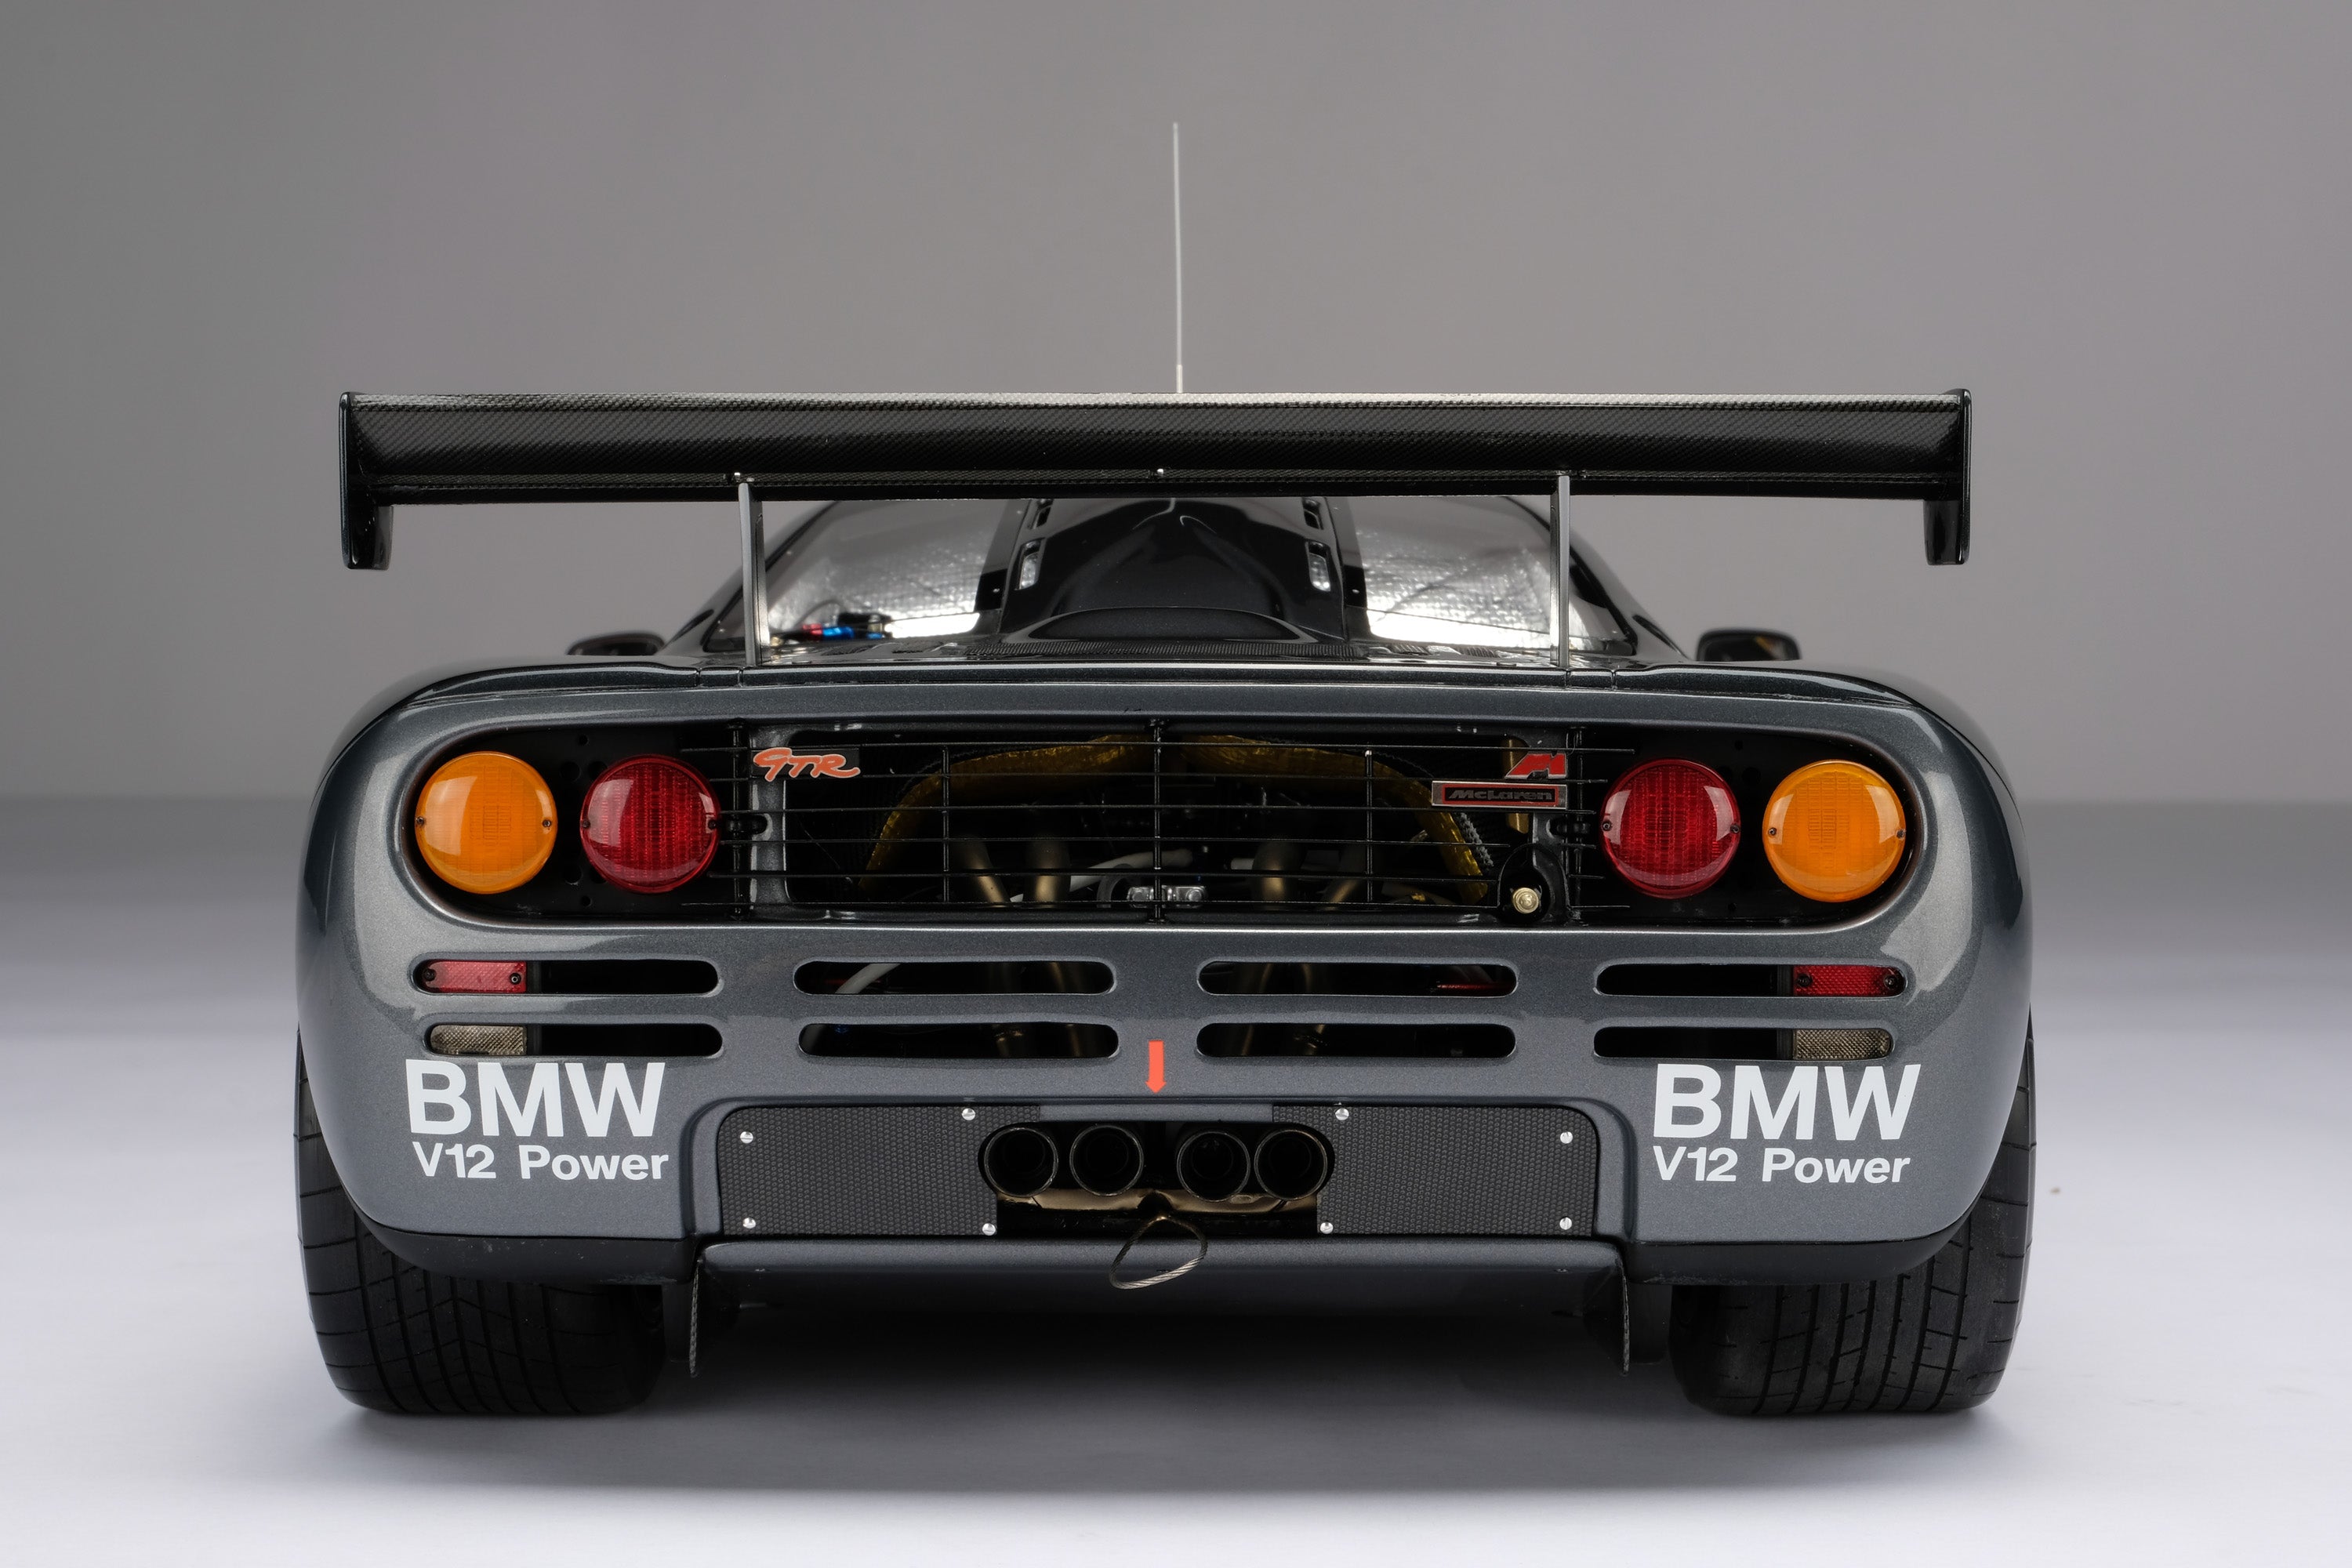 It Took McLaren 18 Months to Painstakingly Restore this F1 GTR to New